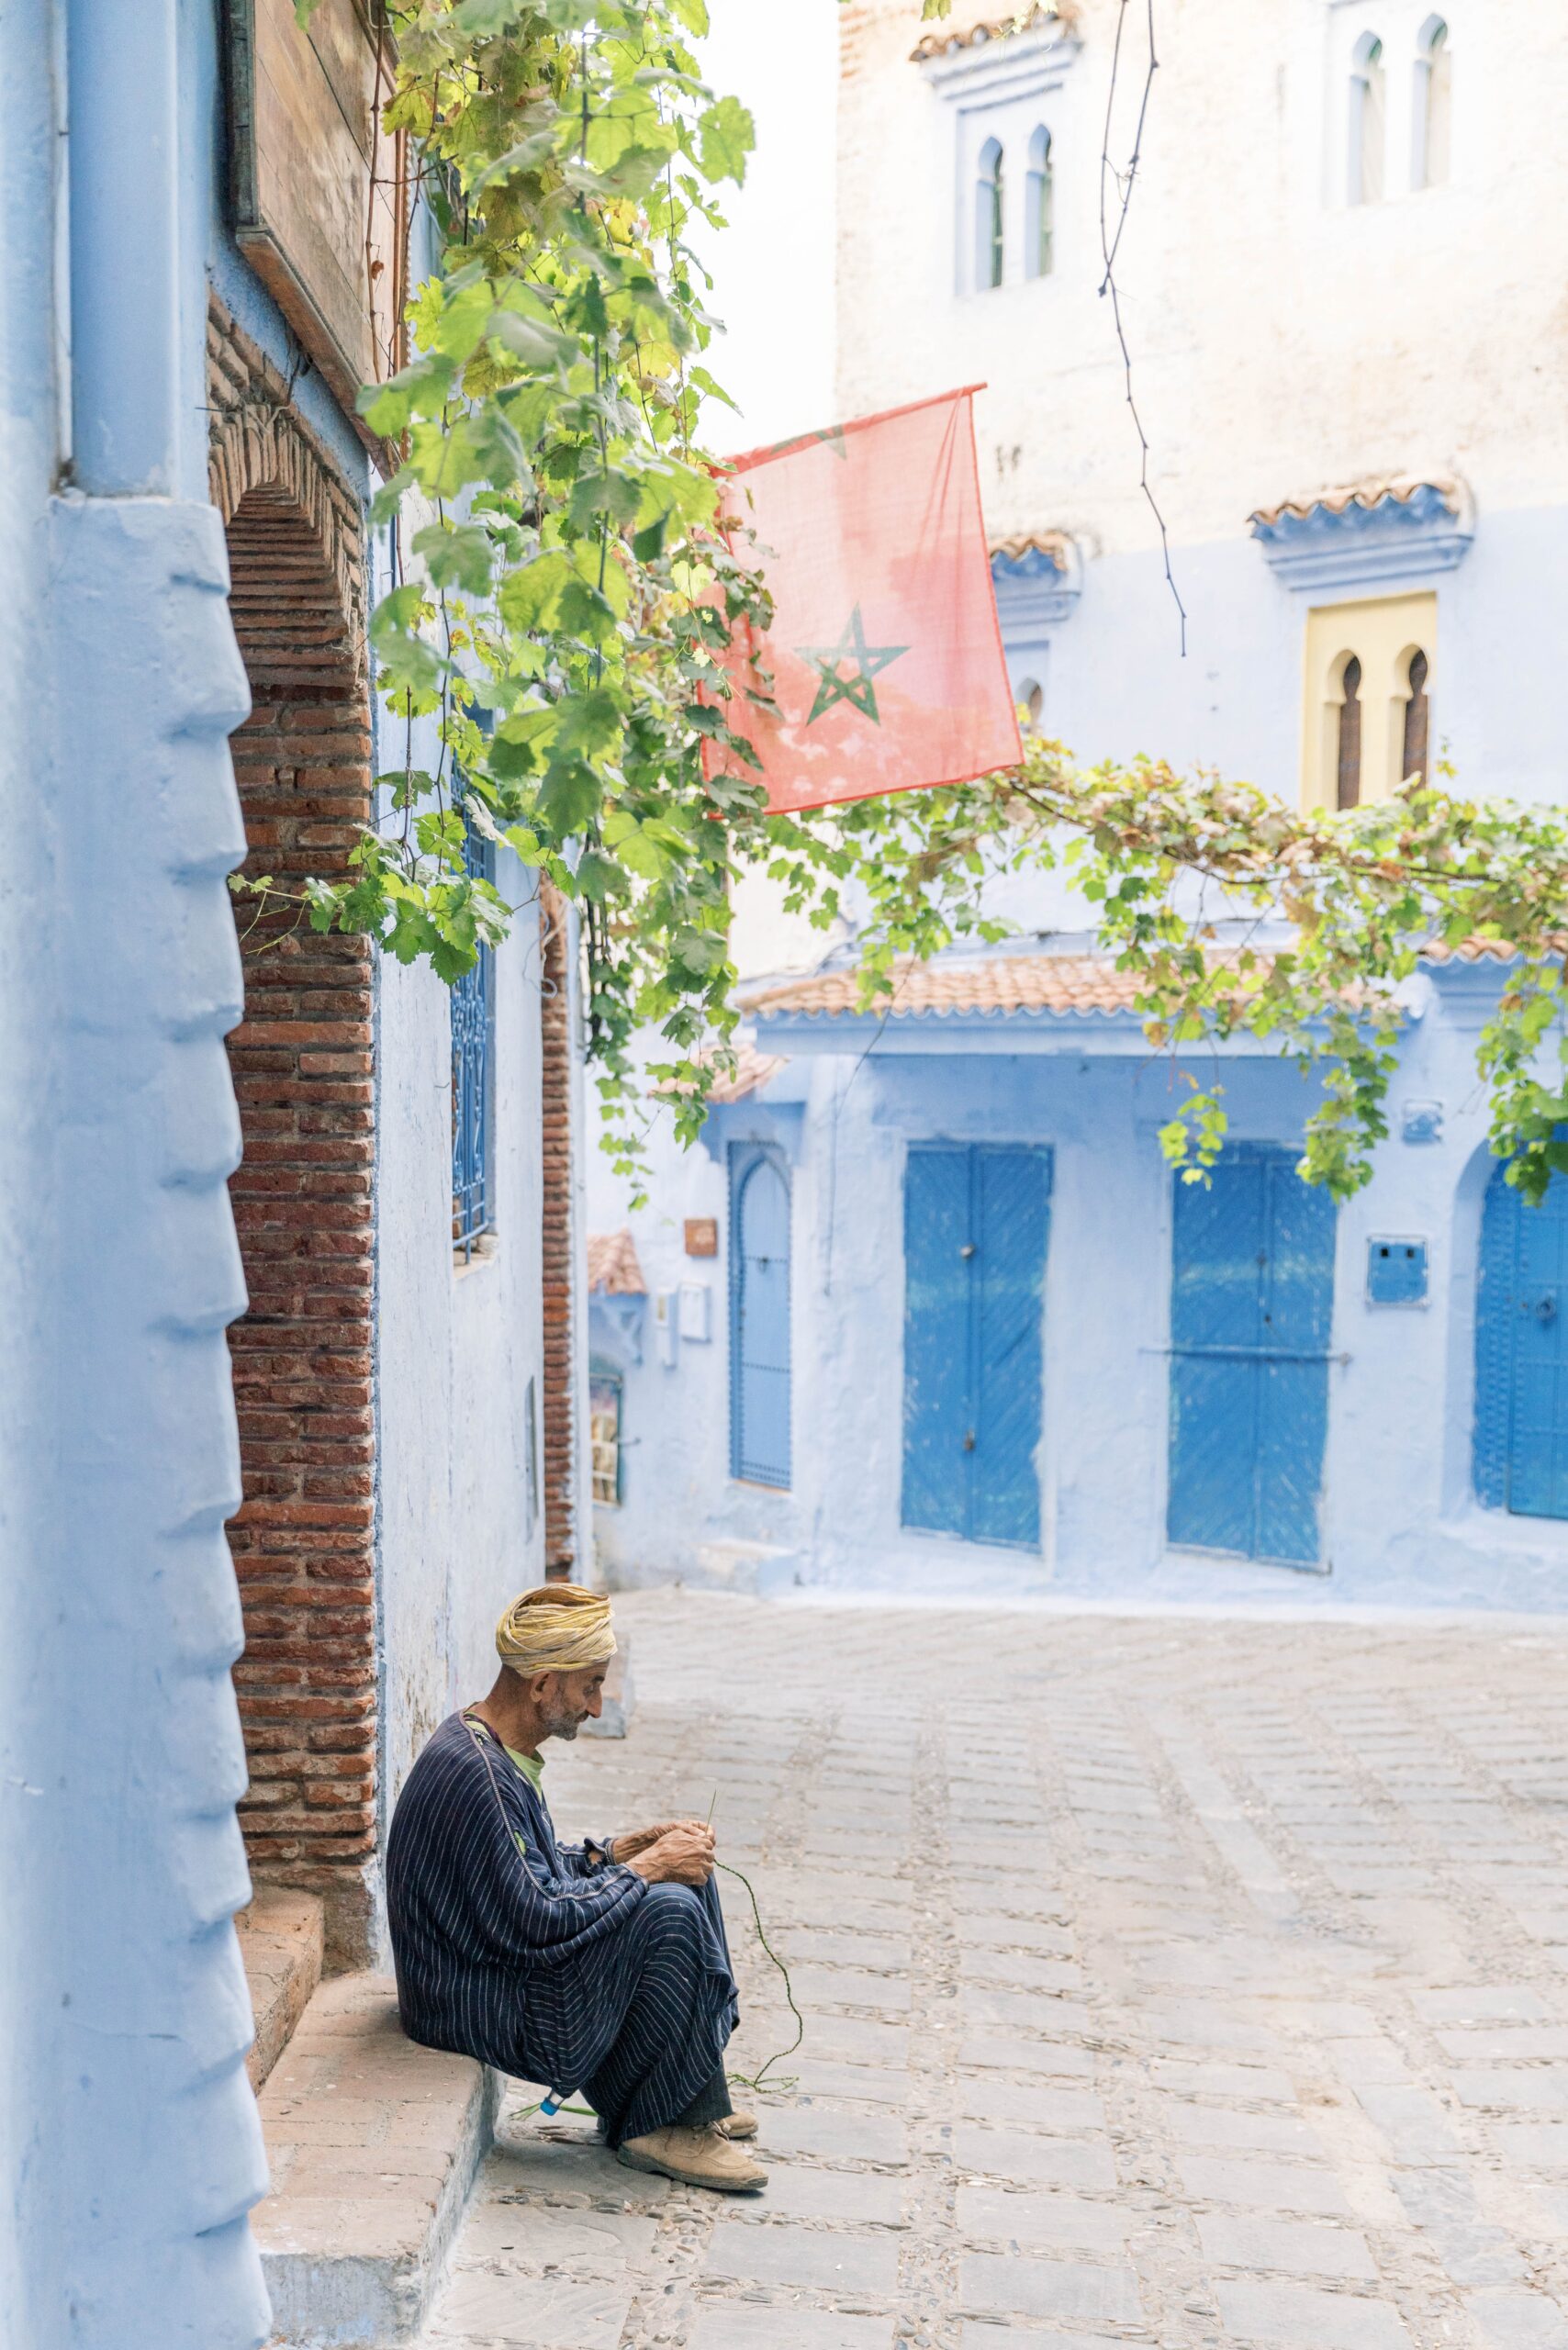 How to spend 10 days in Morocco between Chefchaouen, Fes, the Sahara Desert, and Marrakech! 